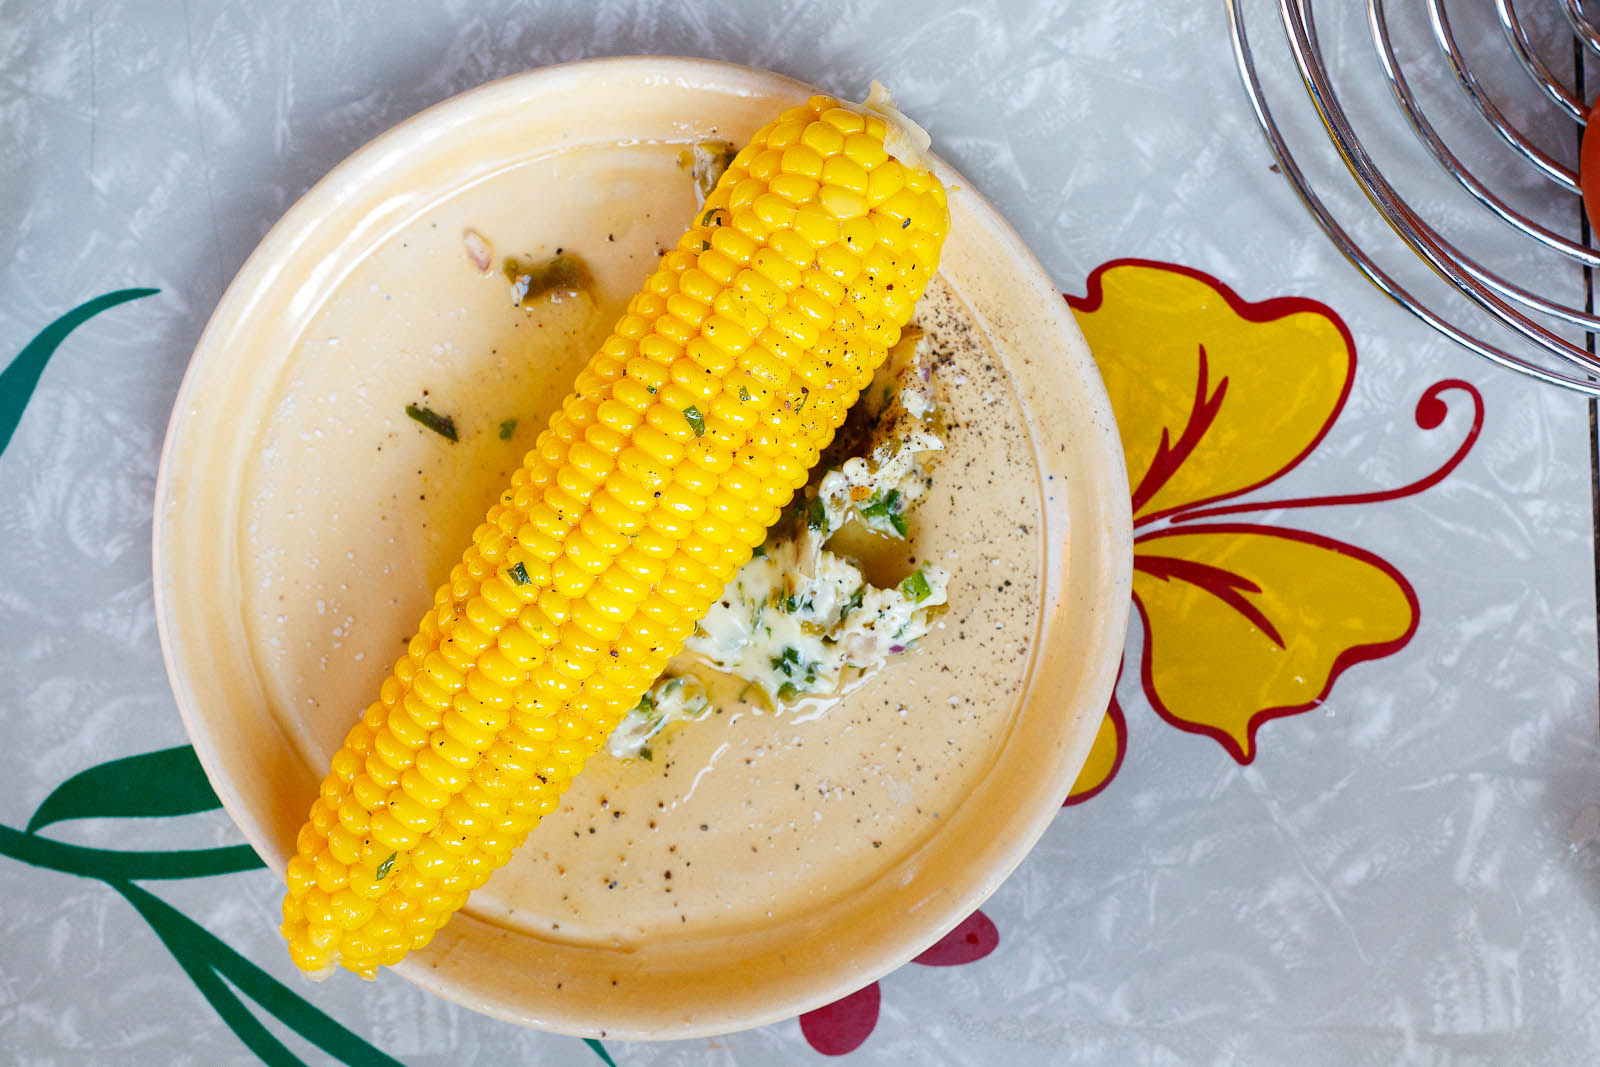 Corn on the cob with jalapeño butter ($4)